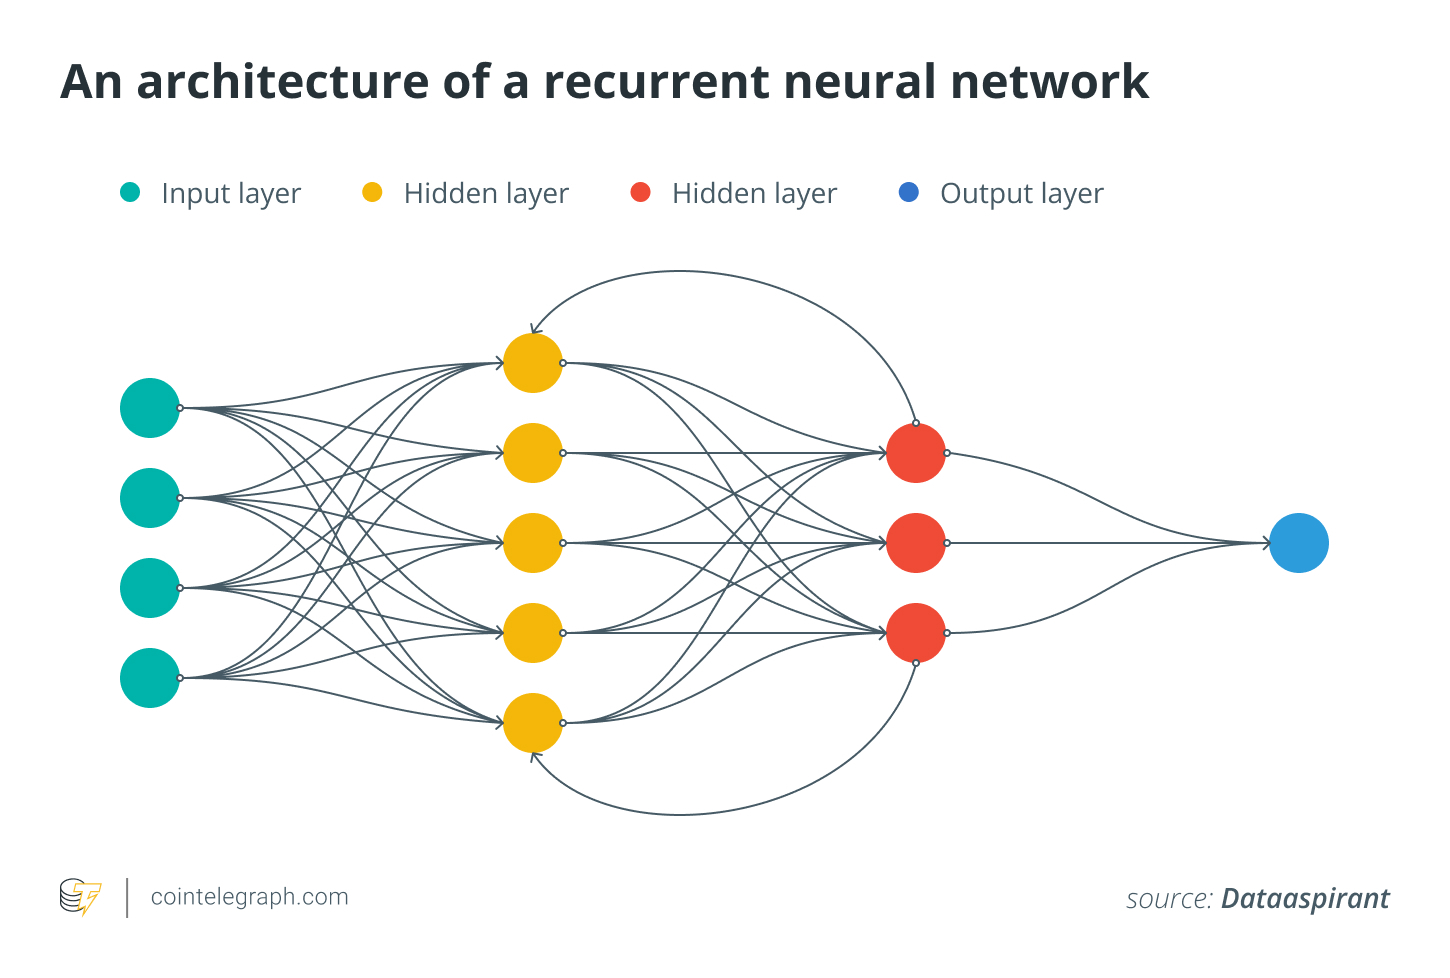 An architecture of a recurrent neural network